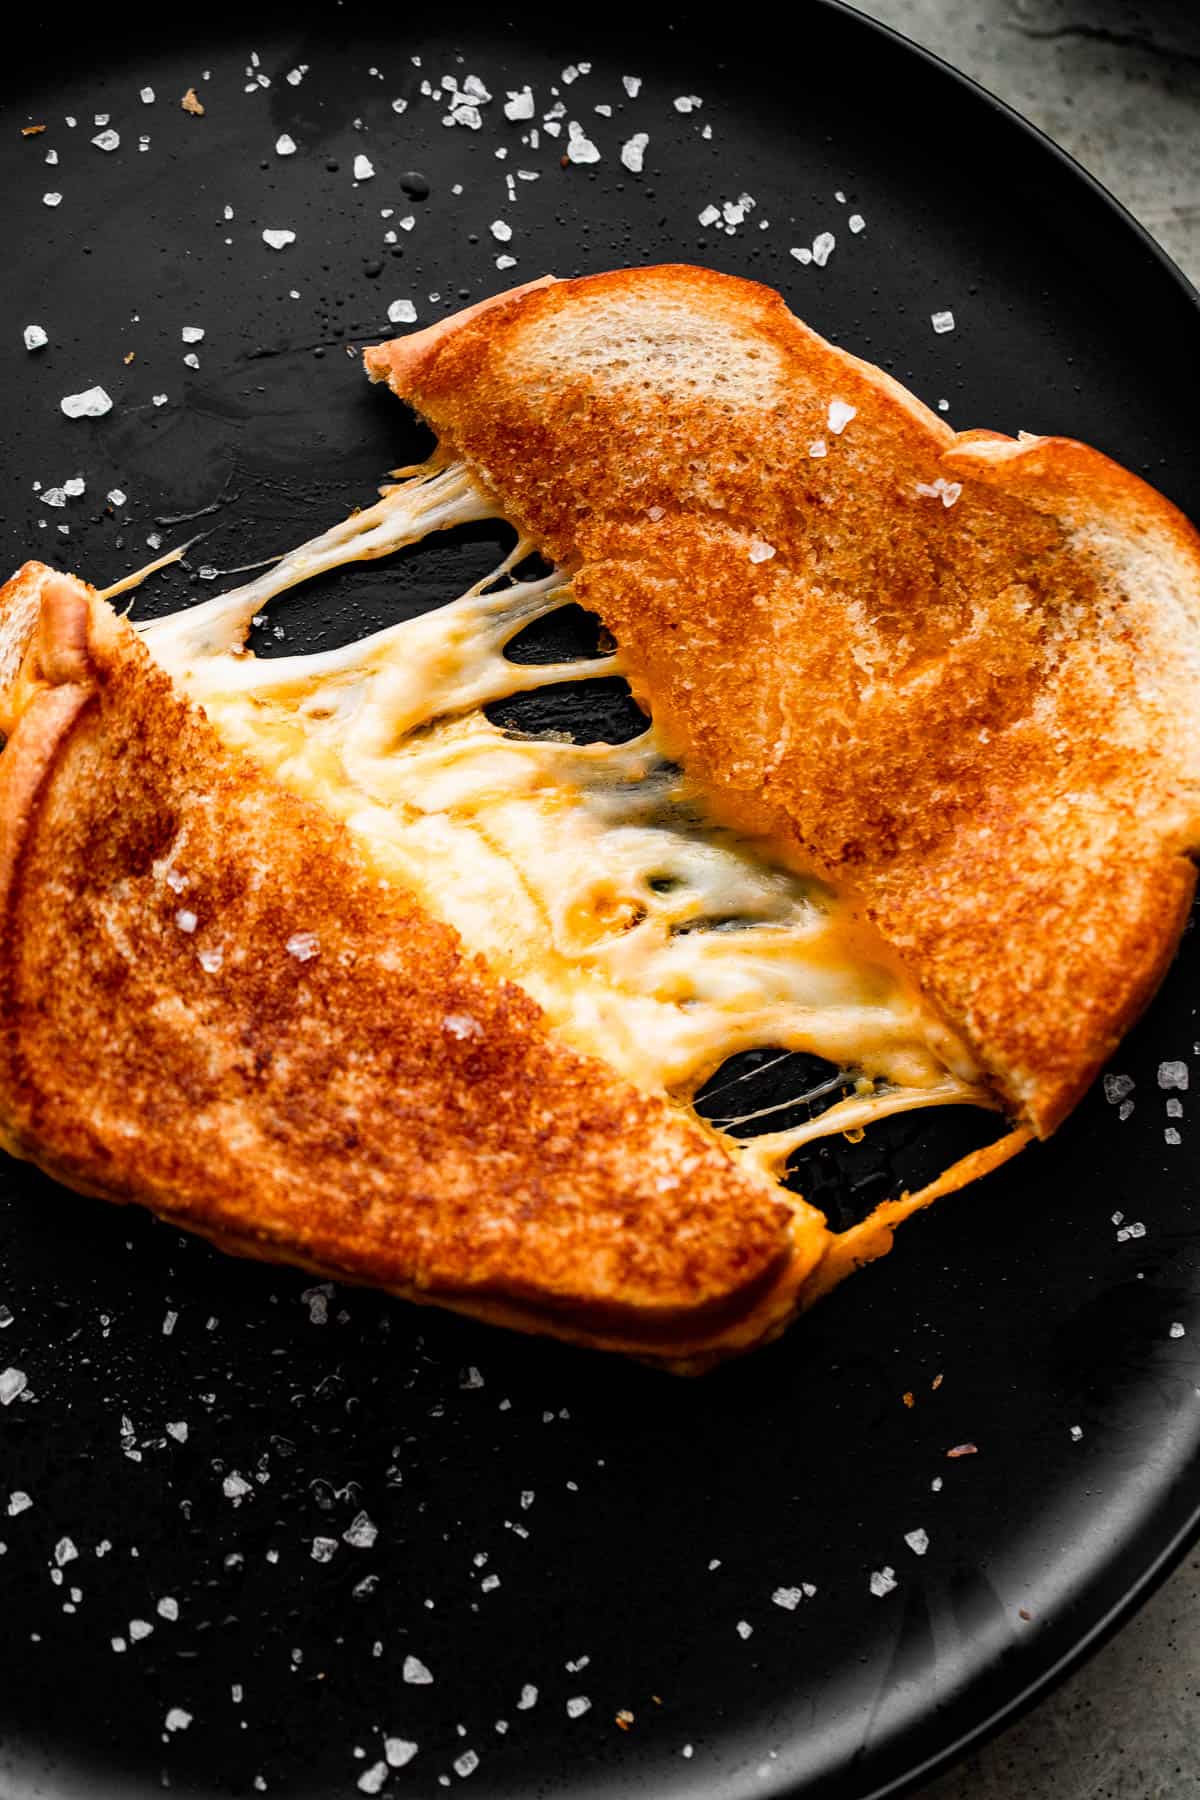 baked grilled cheese sandwich cut and pulled apart, with melted cheese tearing through the center.